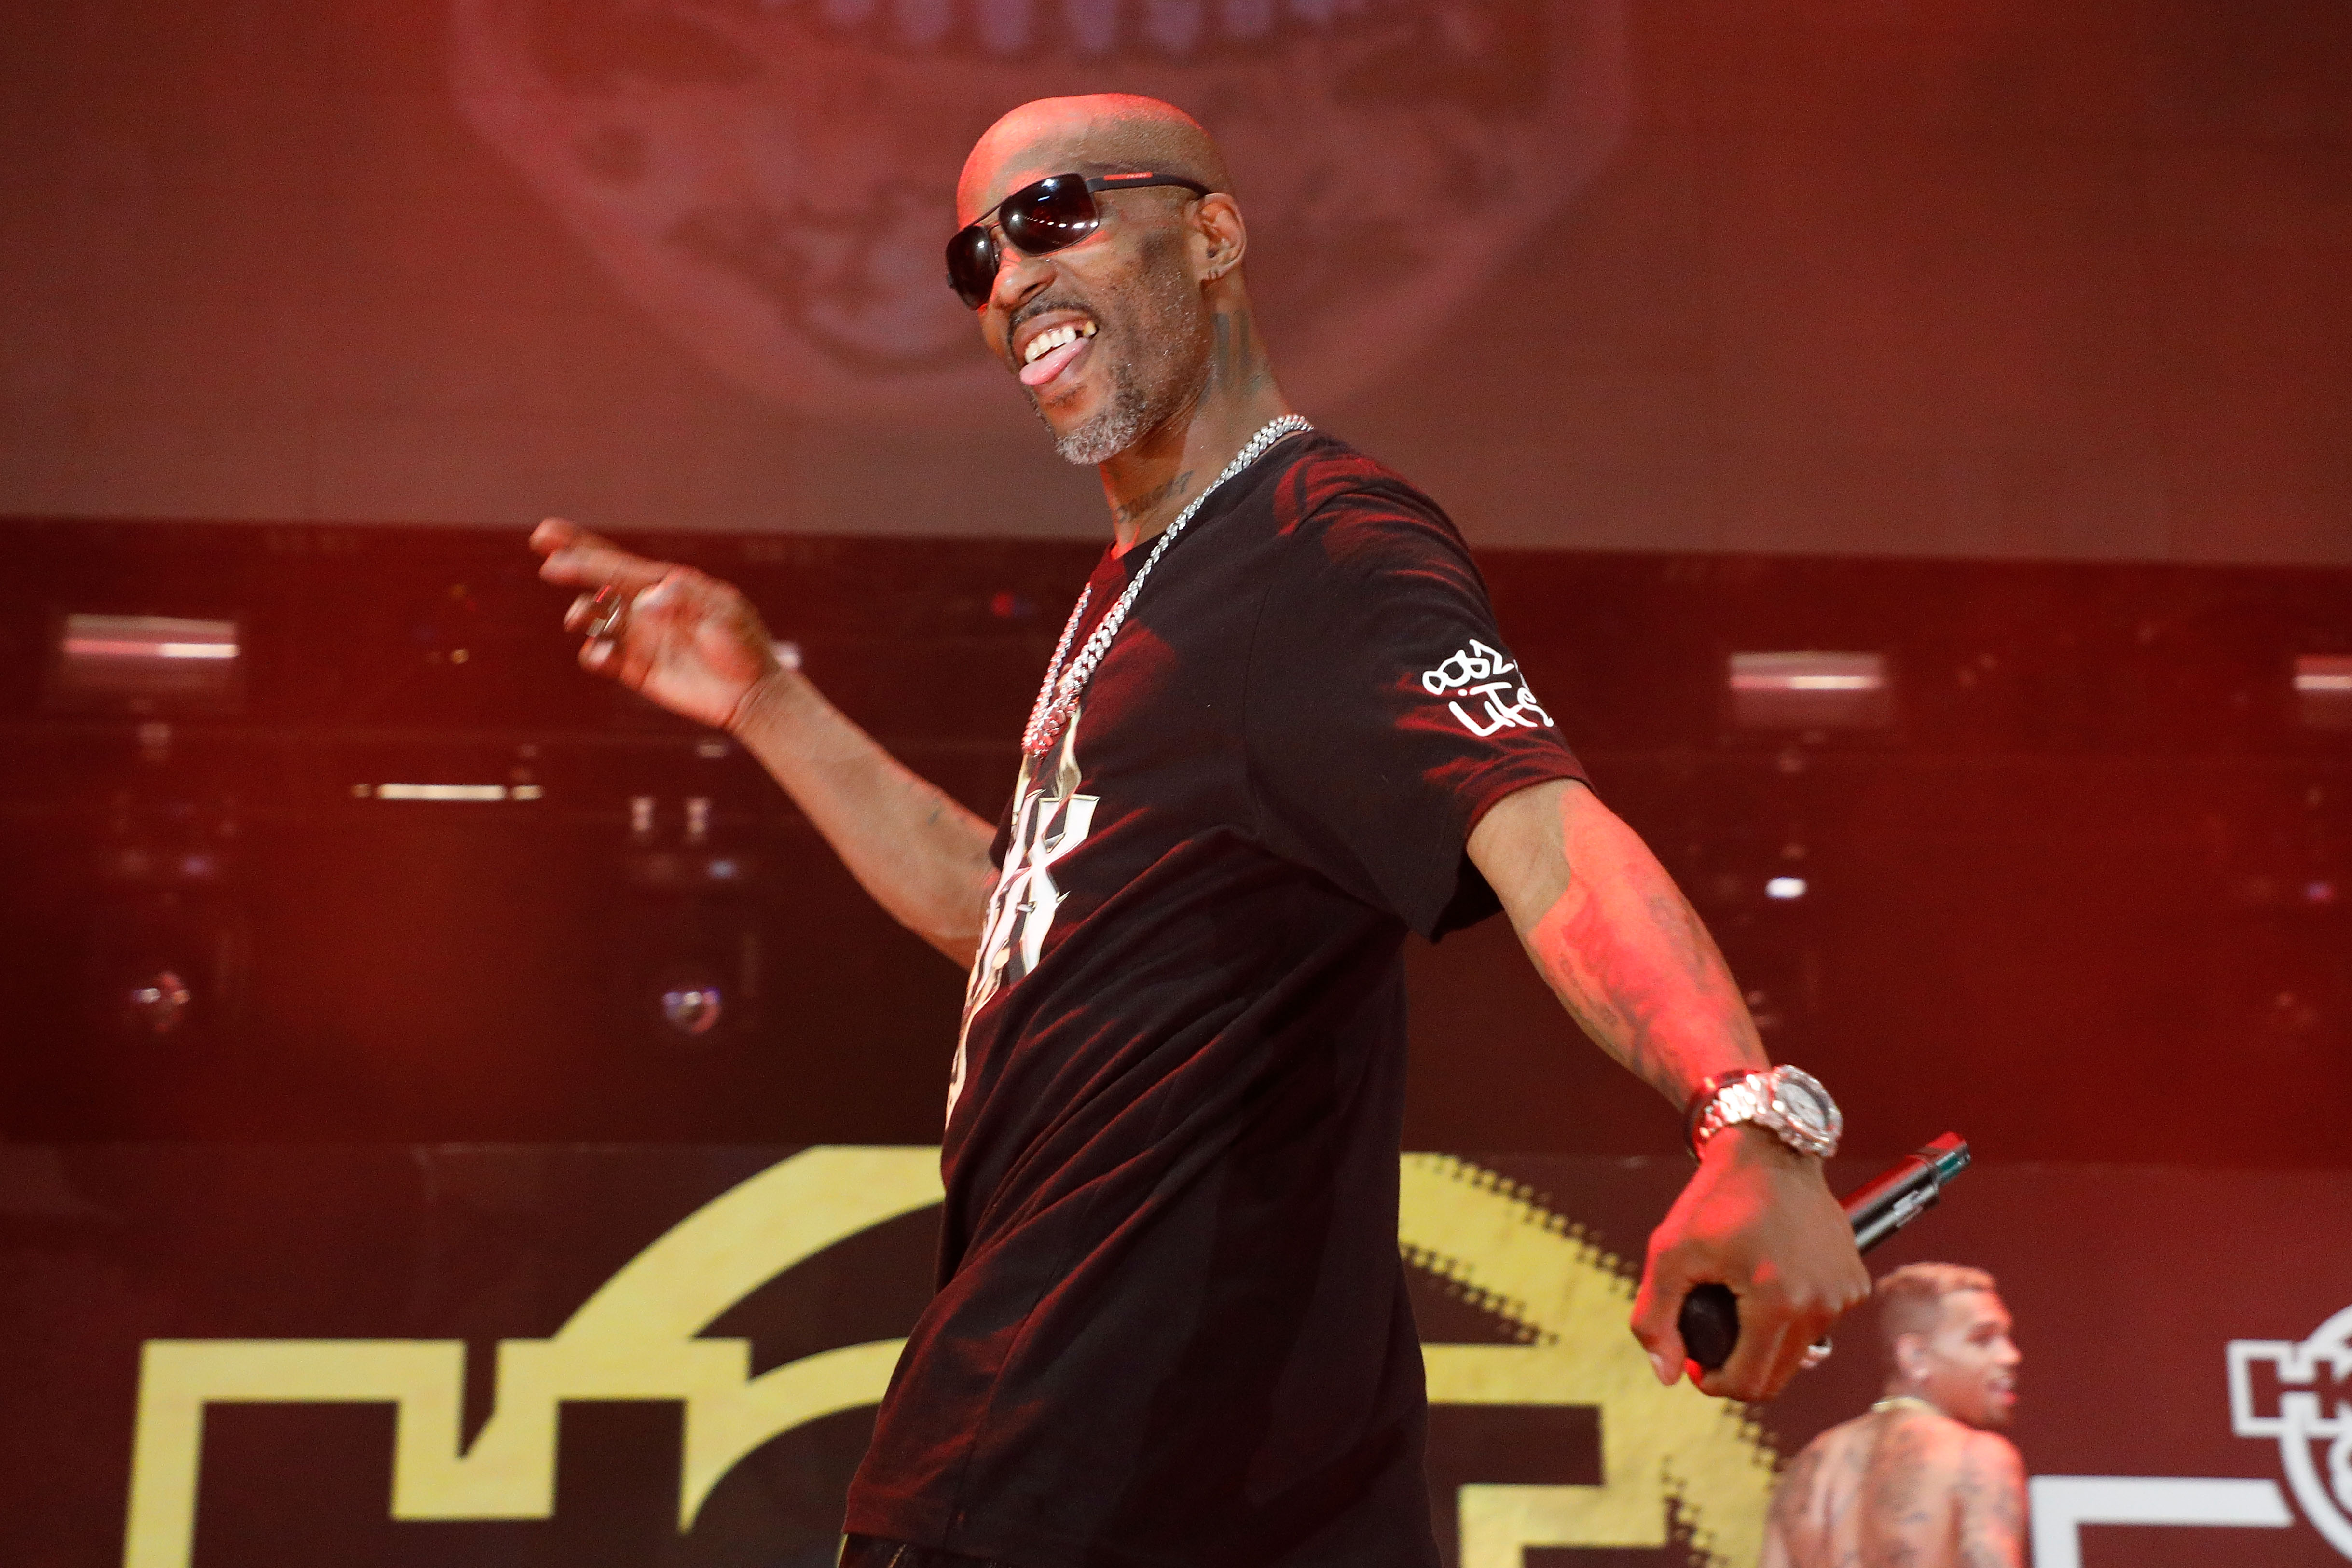 DMX sticks his tongue out on stage